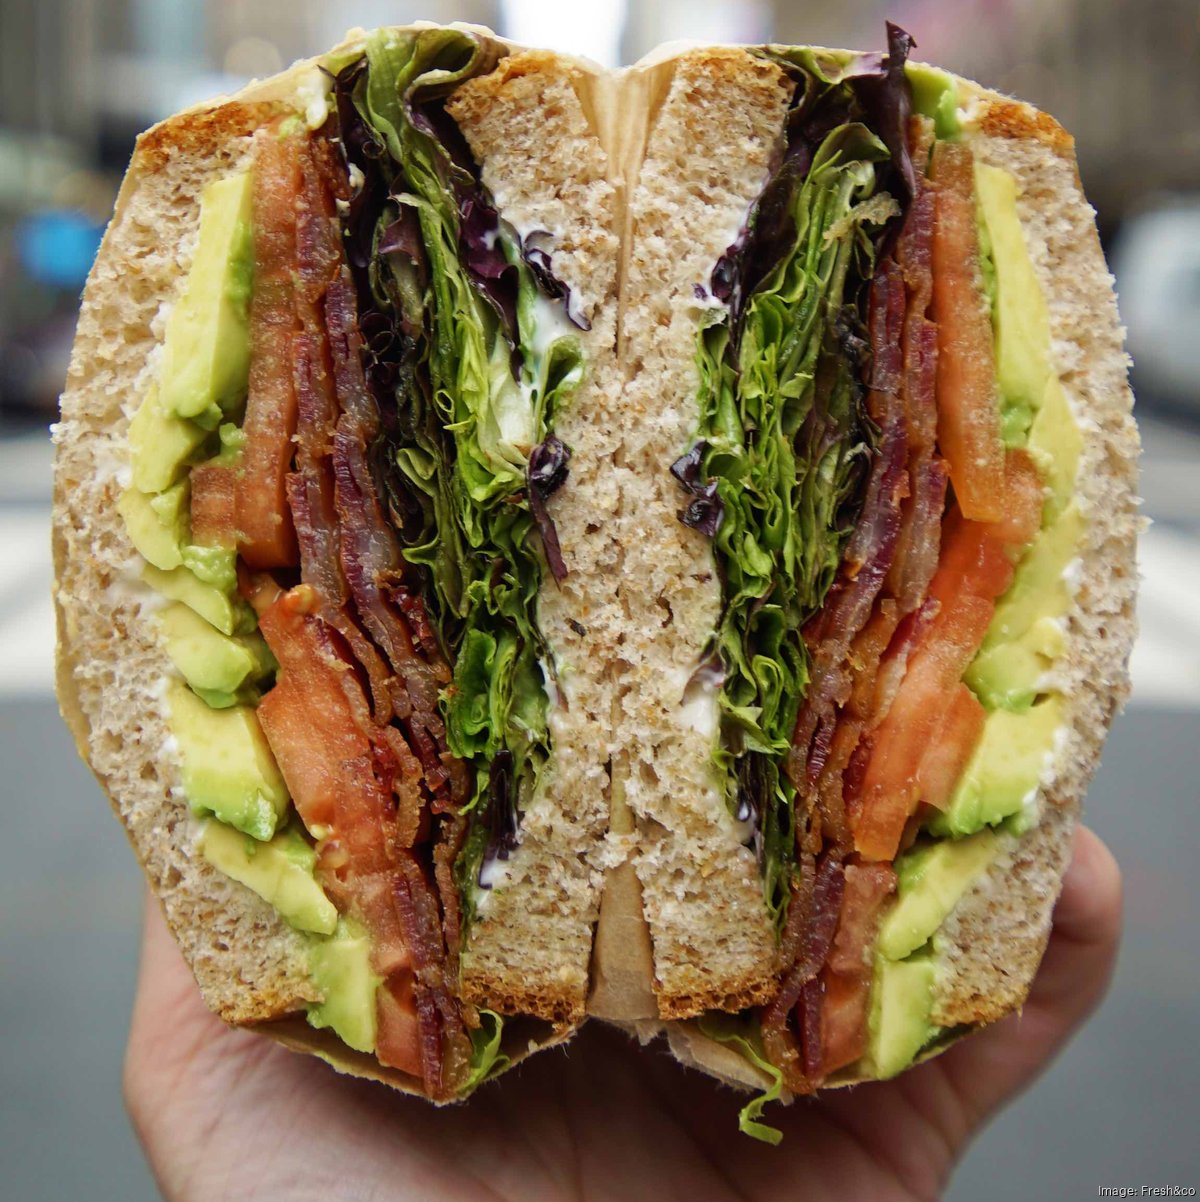 fresh&co  healthy meals for breakfast, lunch, and dinner in nyc